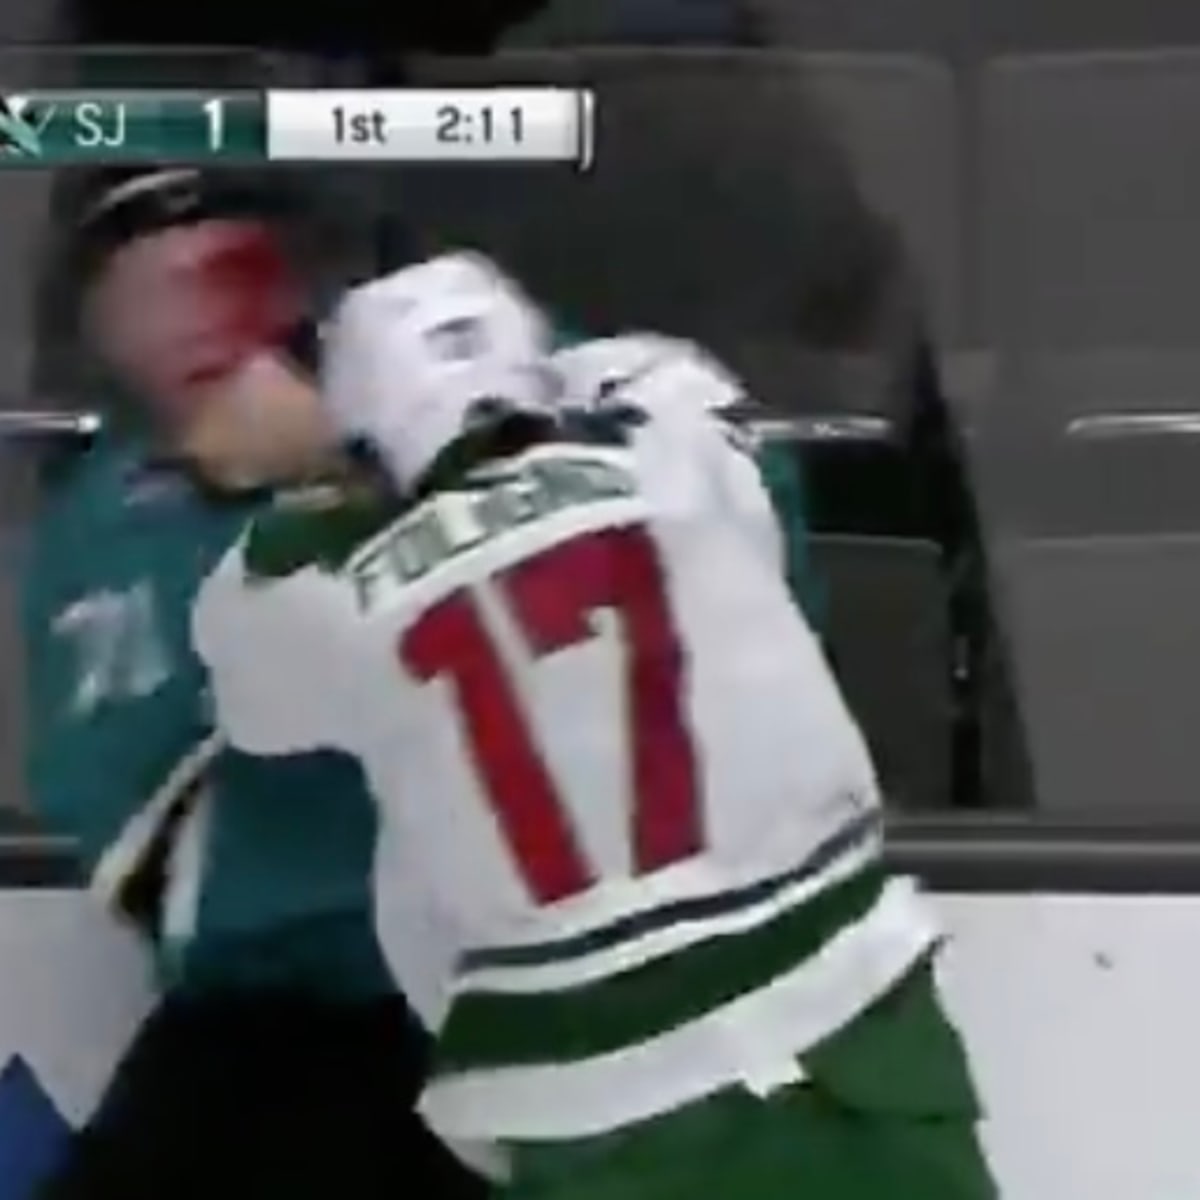 Is this the end of hockey fights?